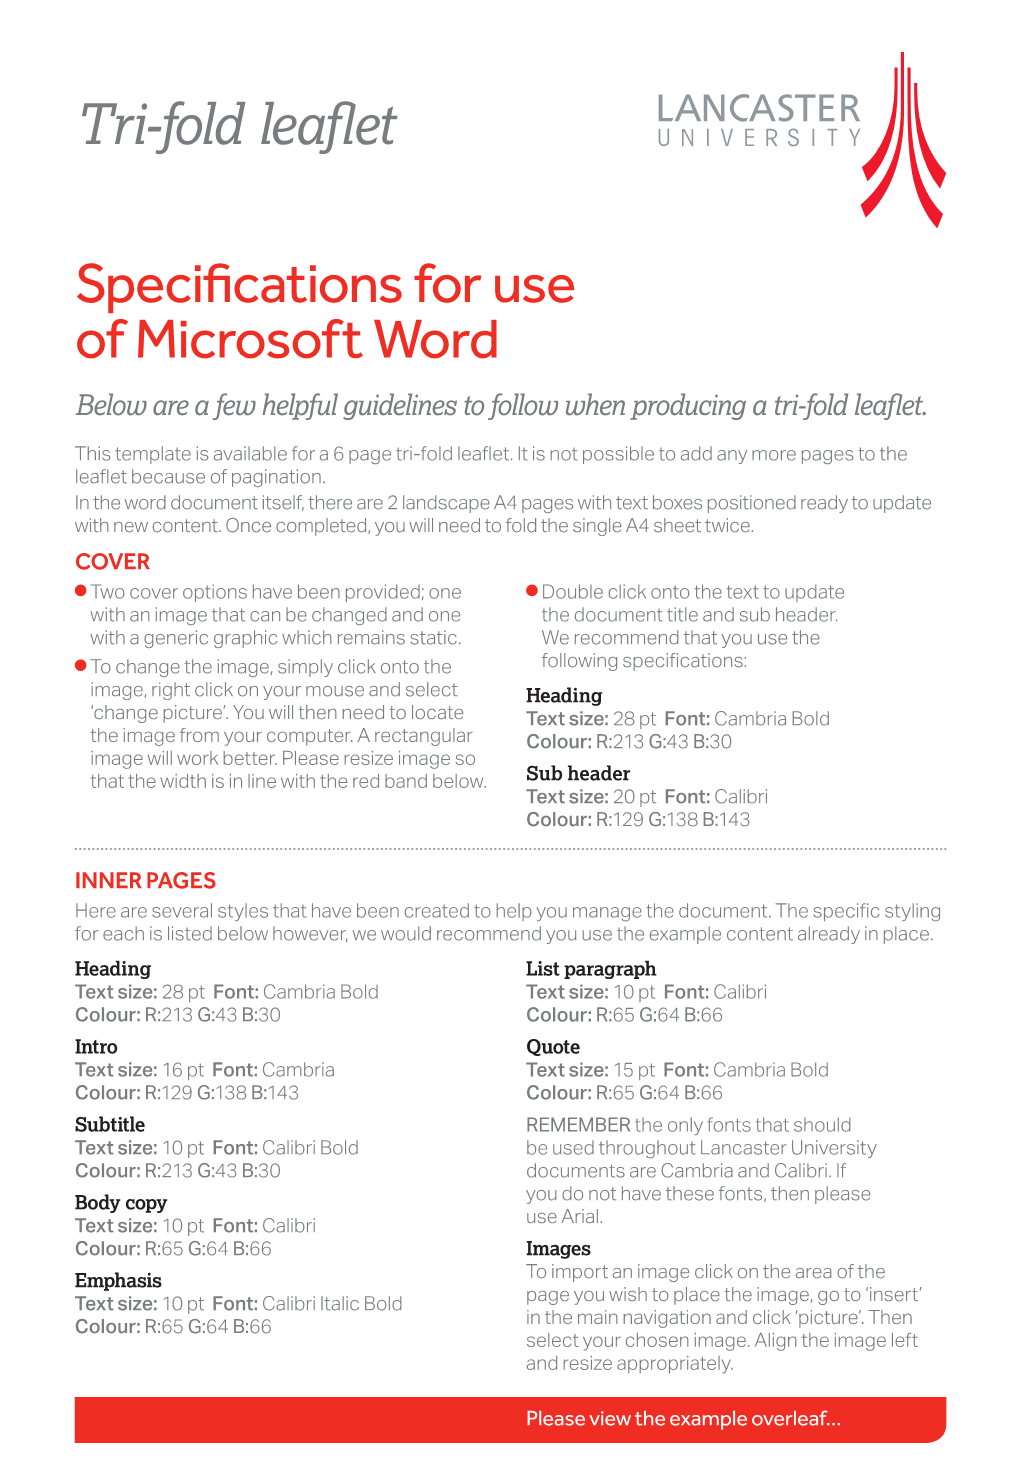 Specifications for Use of Microsoft Word Below Are a Few Helpful Guidelines to Follow When Producing a Tri-Fold Leaflet